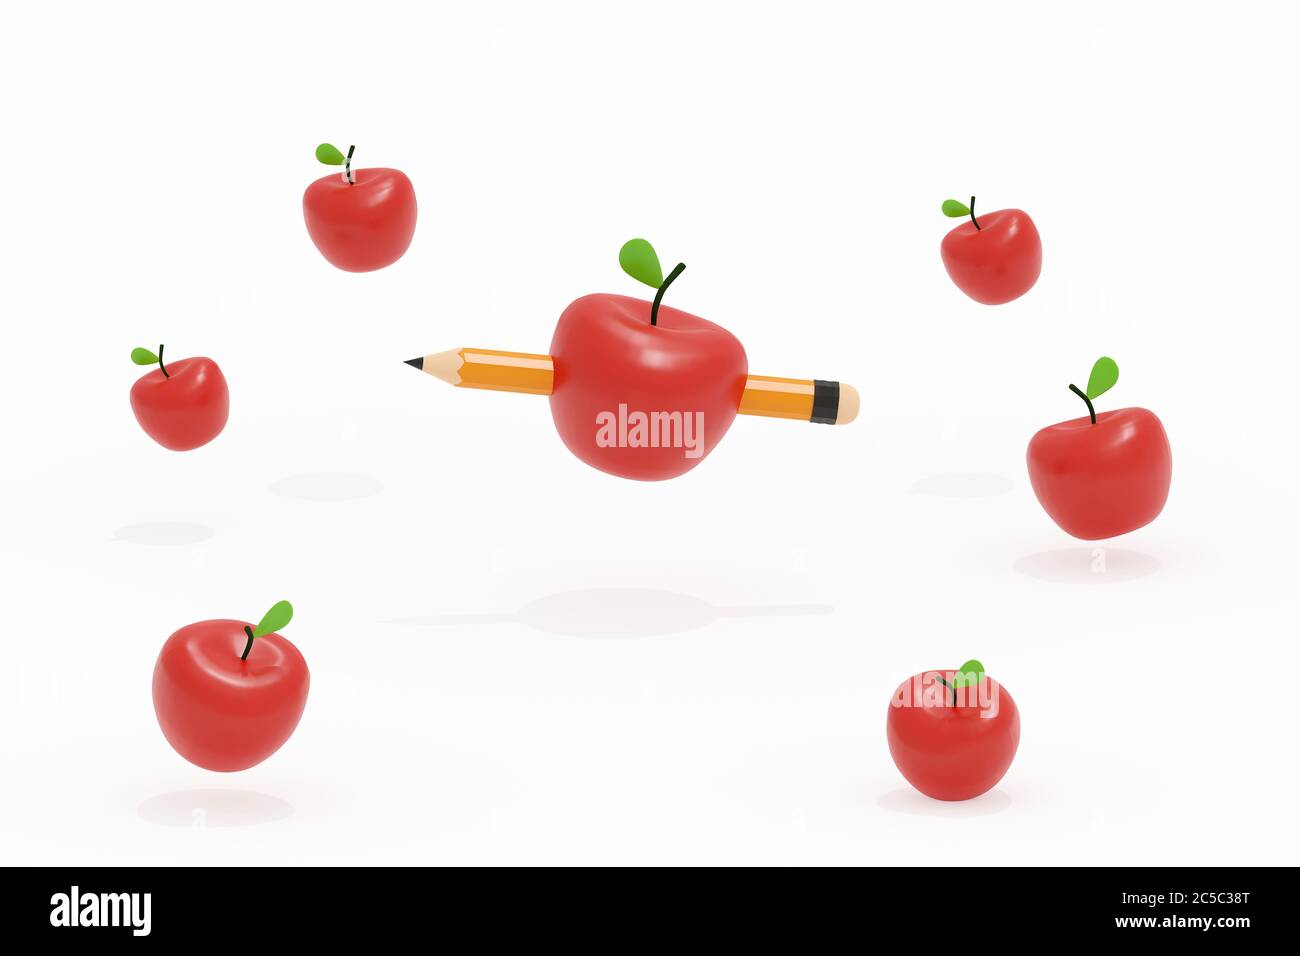 A pencil shoot to a group of apple on white background, 3d illustration education concept. Stock Photo